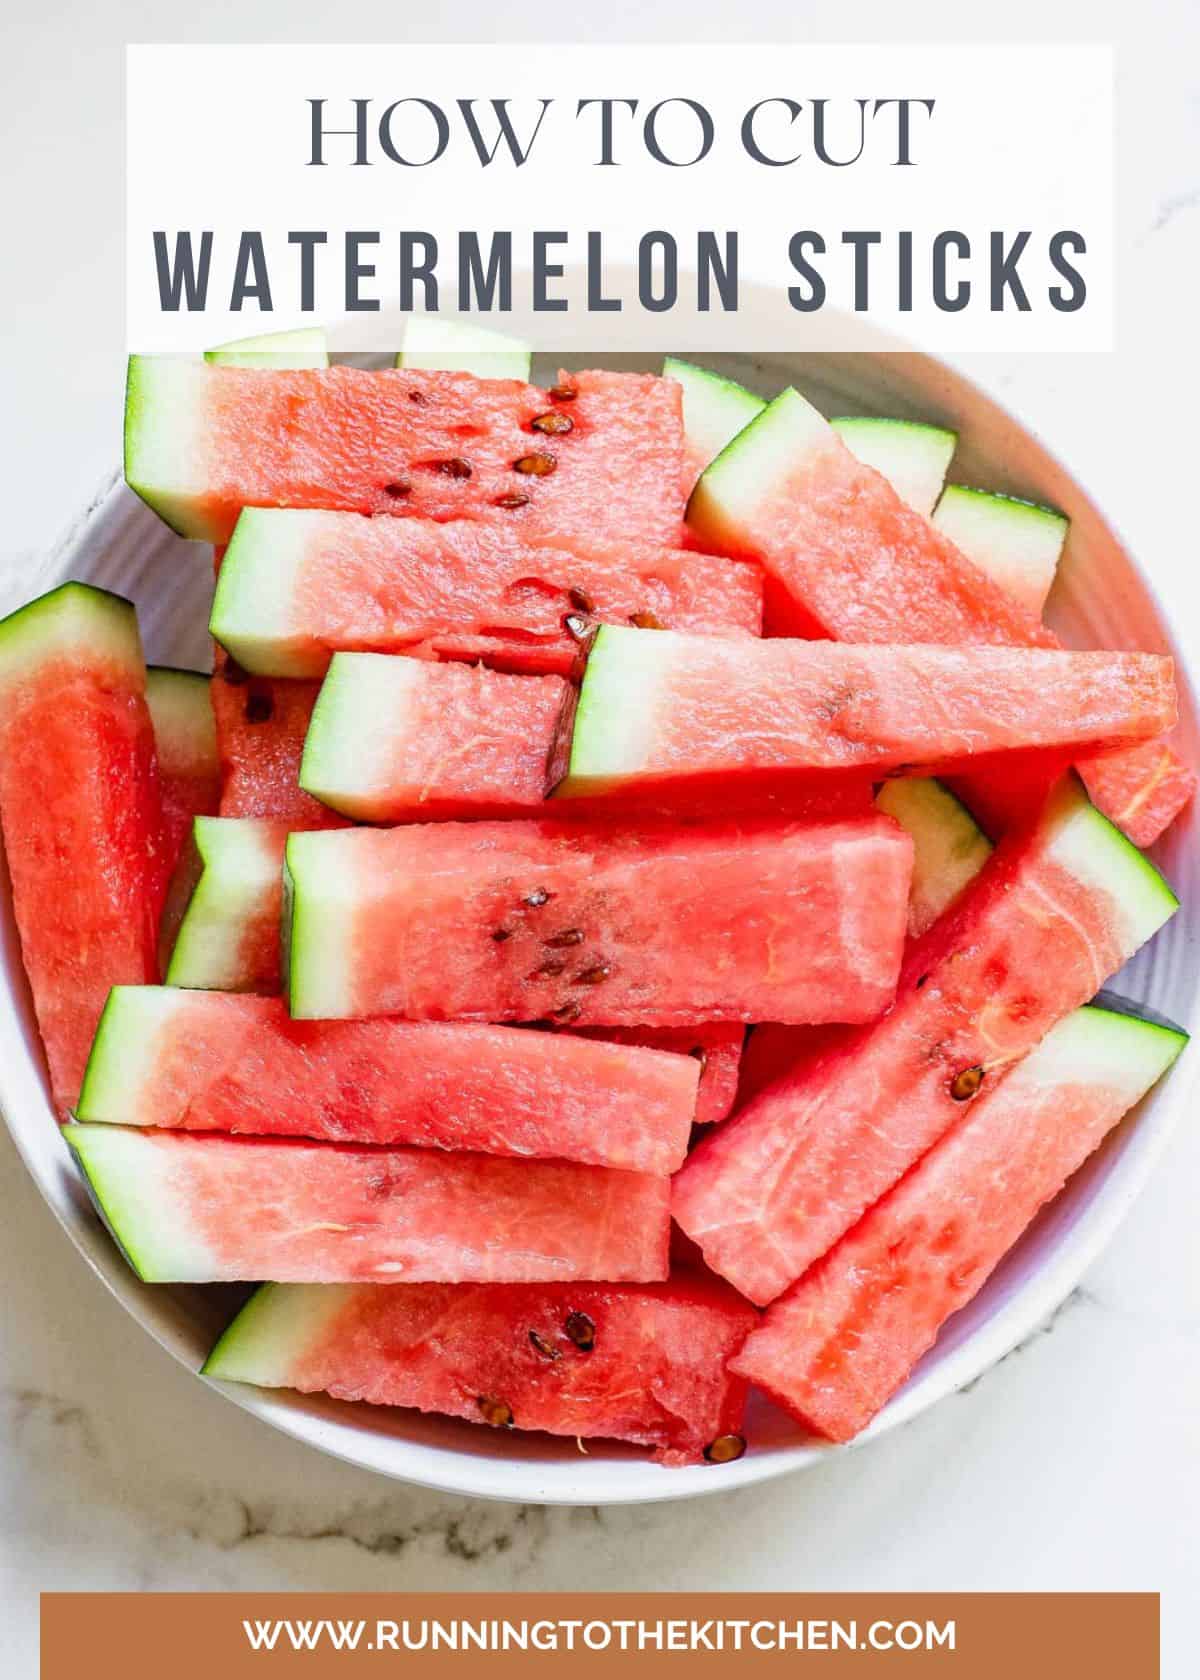 Watermelon sticks in a bowl with text overlay saying: "how to cut watermelon sticks".